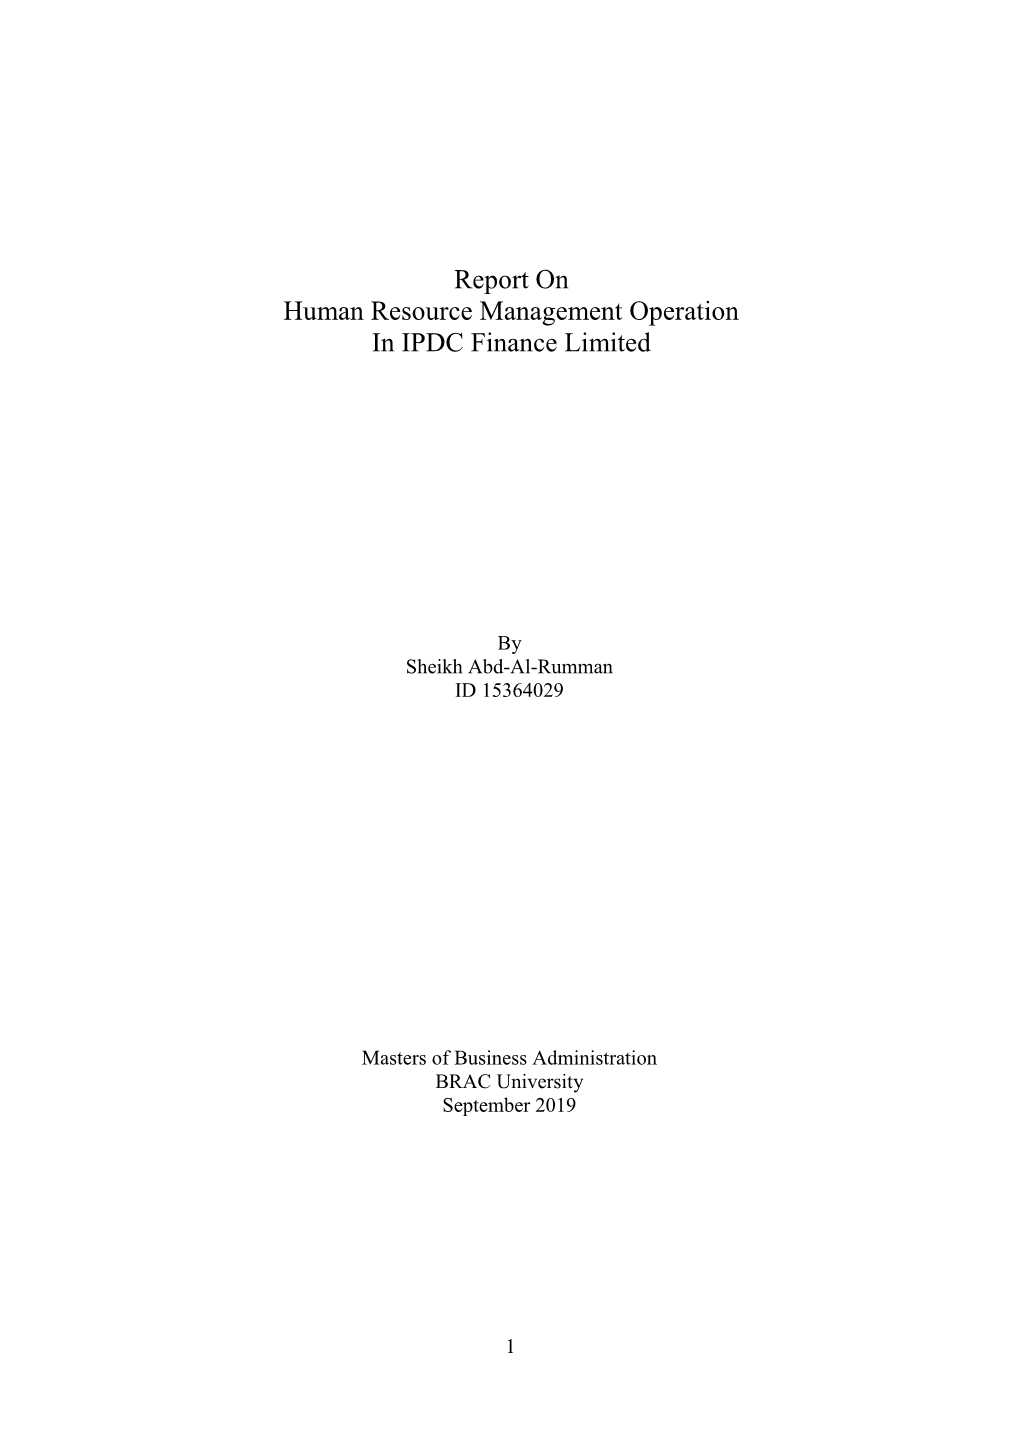 Report on Human Resource Management Operation in IPDC Finance Limited